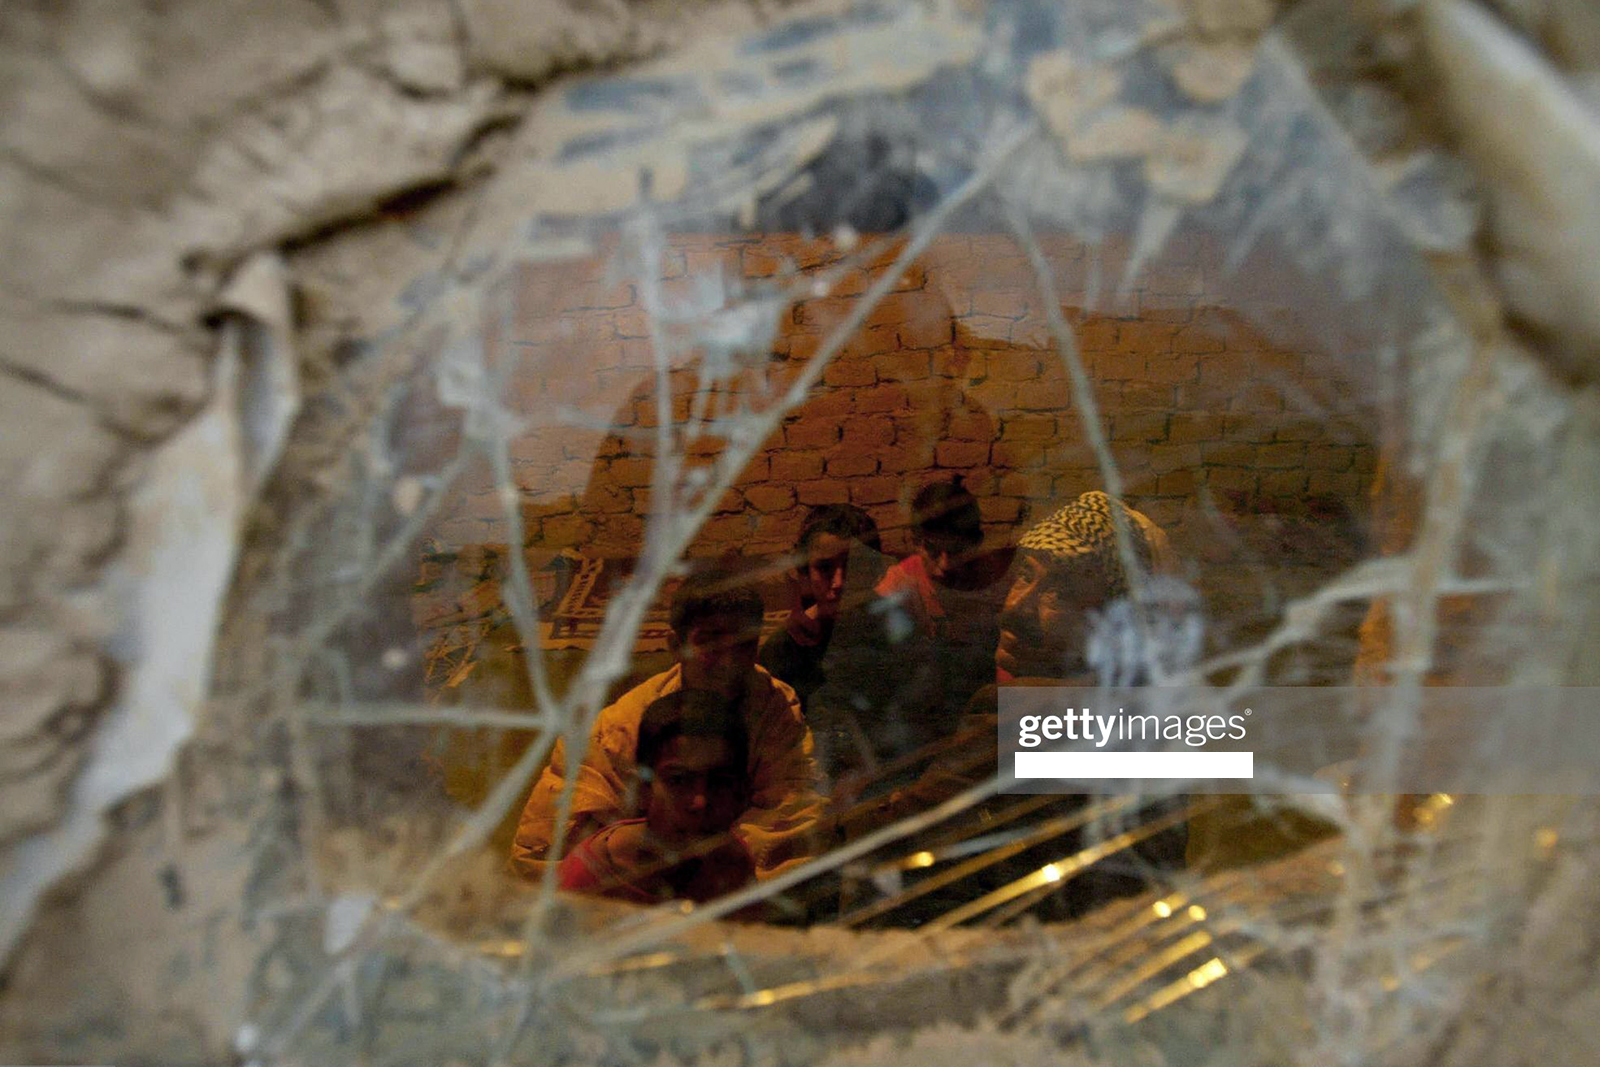 KIRKUK, IRAQ:  An Arab family looks through broken glass window of their mud brick home in Nasiriah Yaychi village, near Kirkuk 17 February 2004. A high-ranking Kurdish official reiterated that the northern oil city of Kirkuk, which was arabised by Saddam Hussein, should be included in the three provinces of Iraqi Kurdistan. AFP PHOTO DANIEL MIHAILESCU  (Photo credit should read DANIEL MIHAILESCU/AFP via Getty Images)